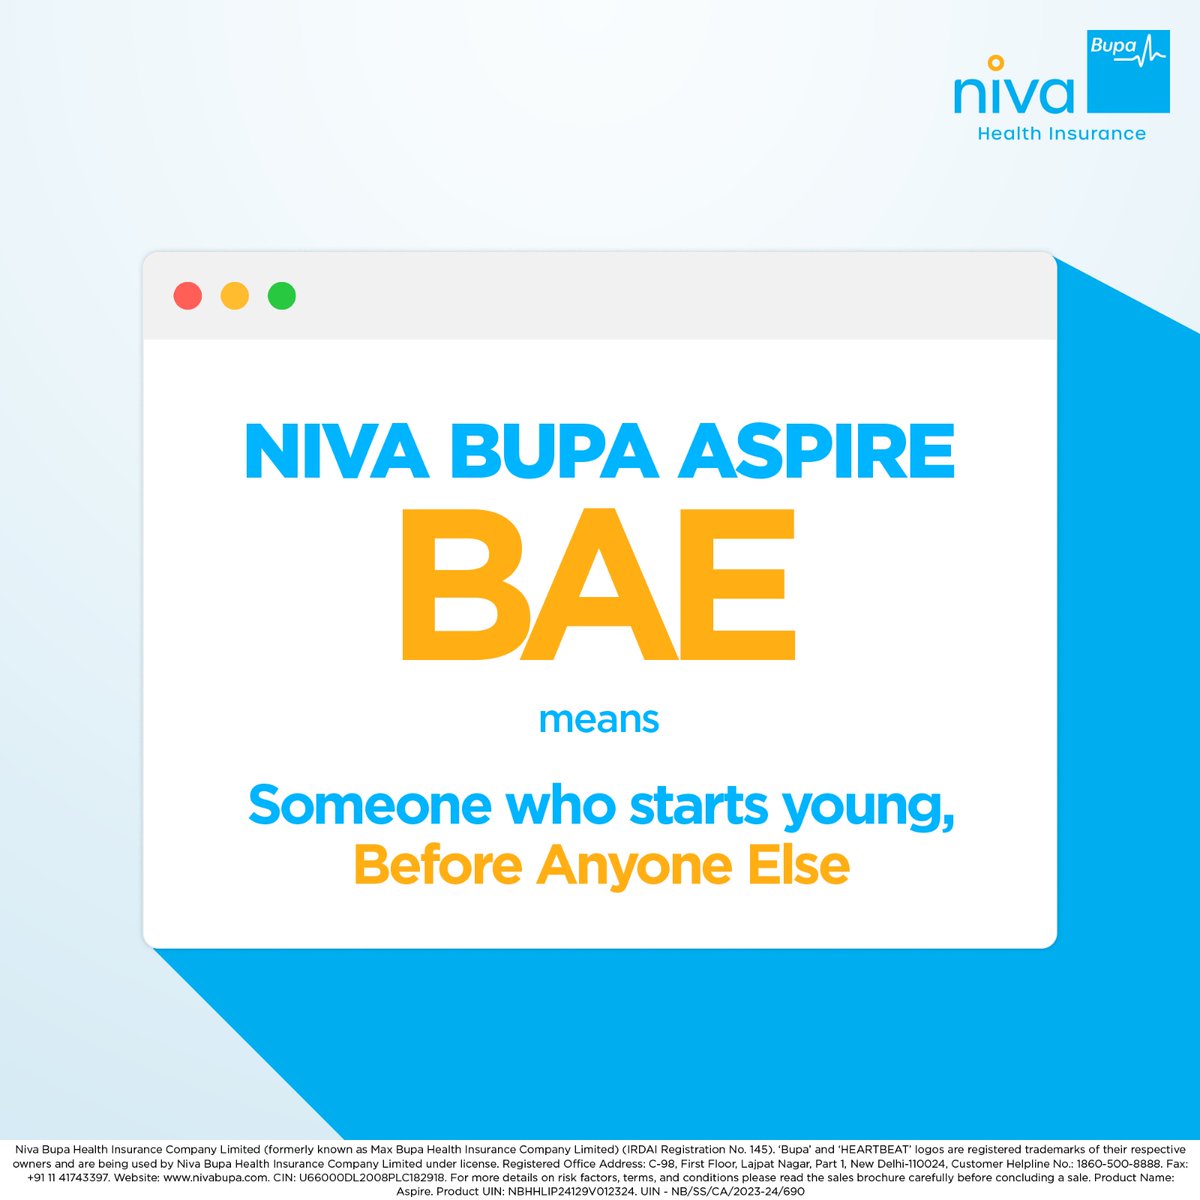 You do you, but better start young to let it flow. Because those who start young earn the respect from everyone. 🫡 Niva Bupa Aspire, a Health Insurance plan that rewards you for starting young.🤩🥳